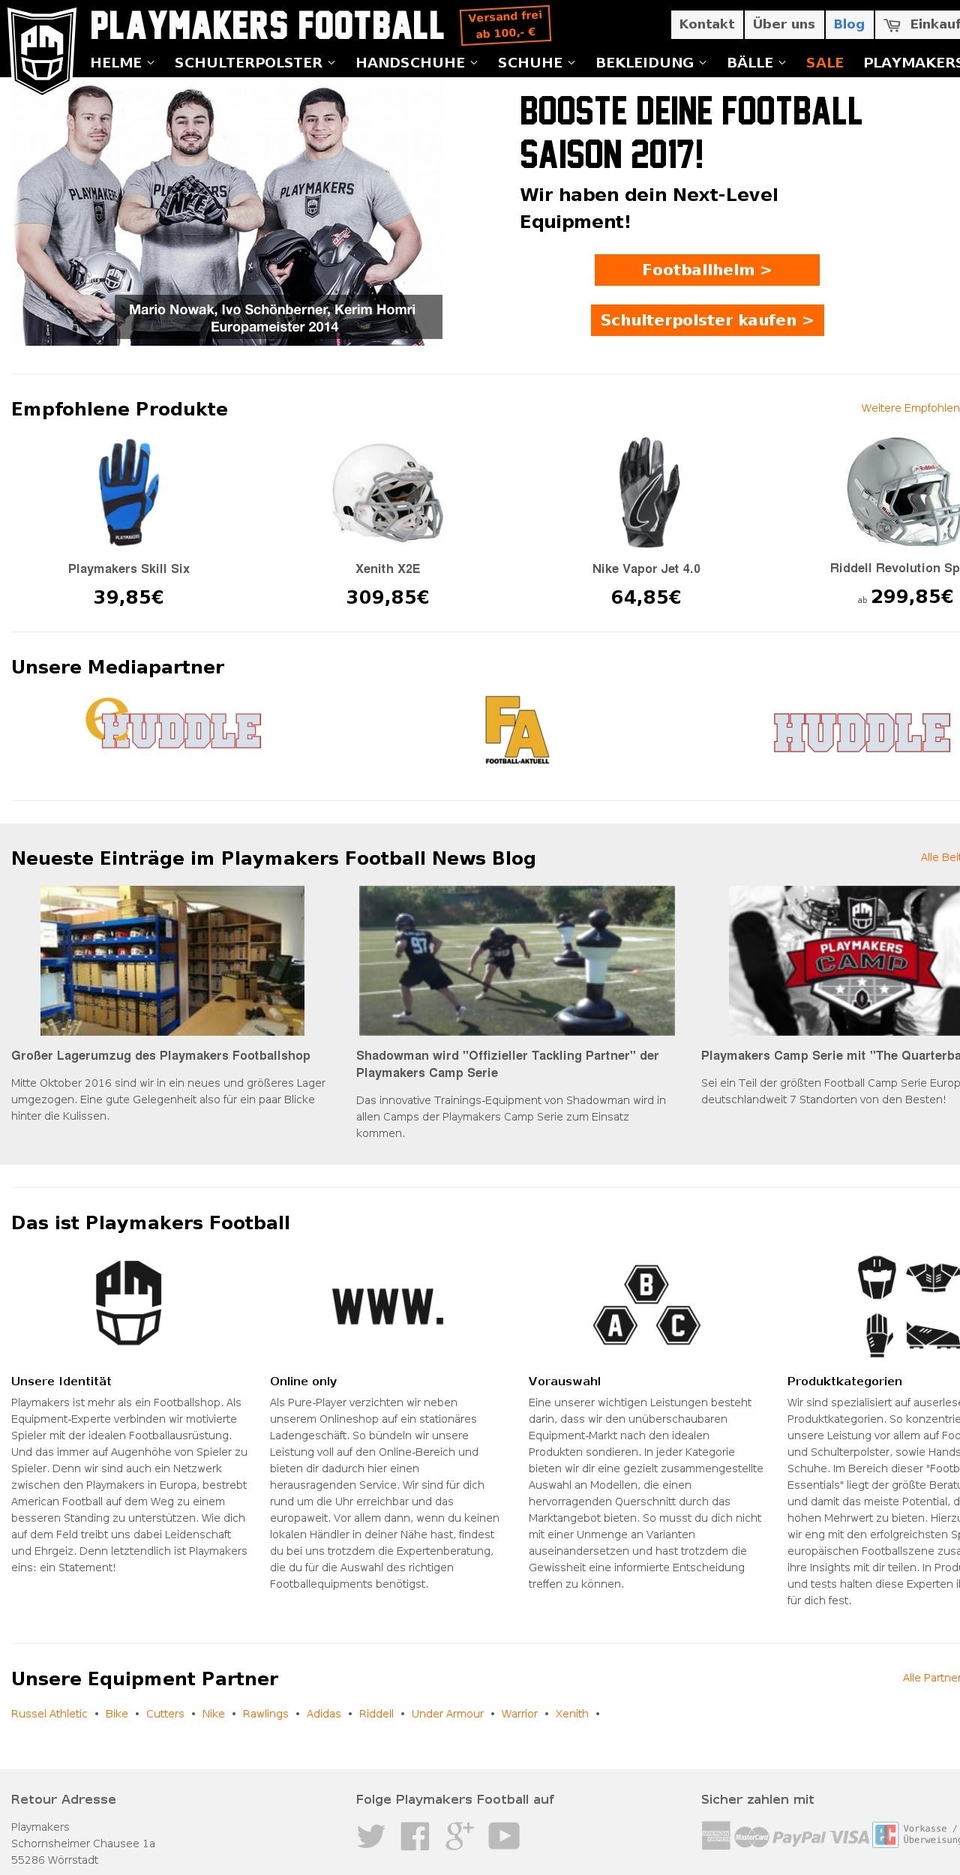 Playmakers Football v2 Shopify theme site example playmakersfootball.net